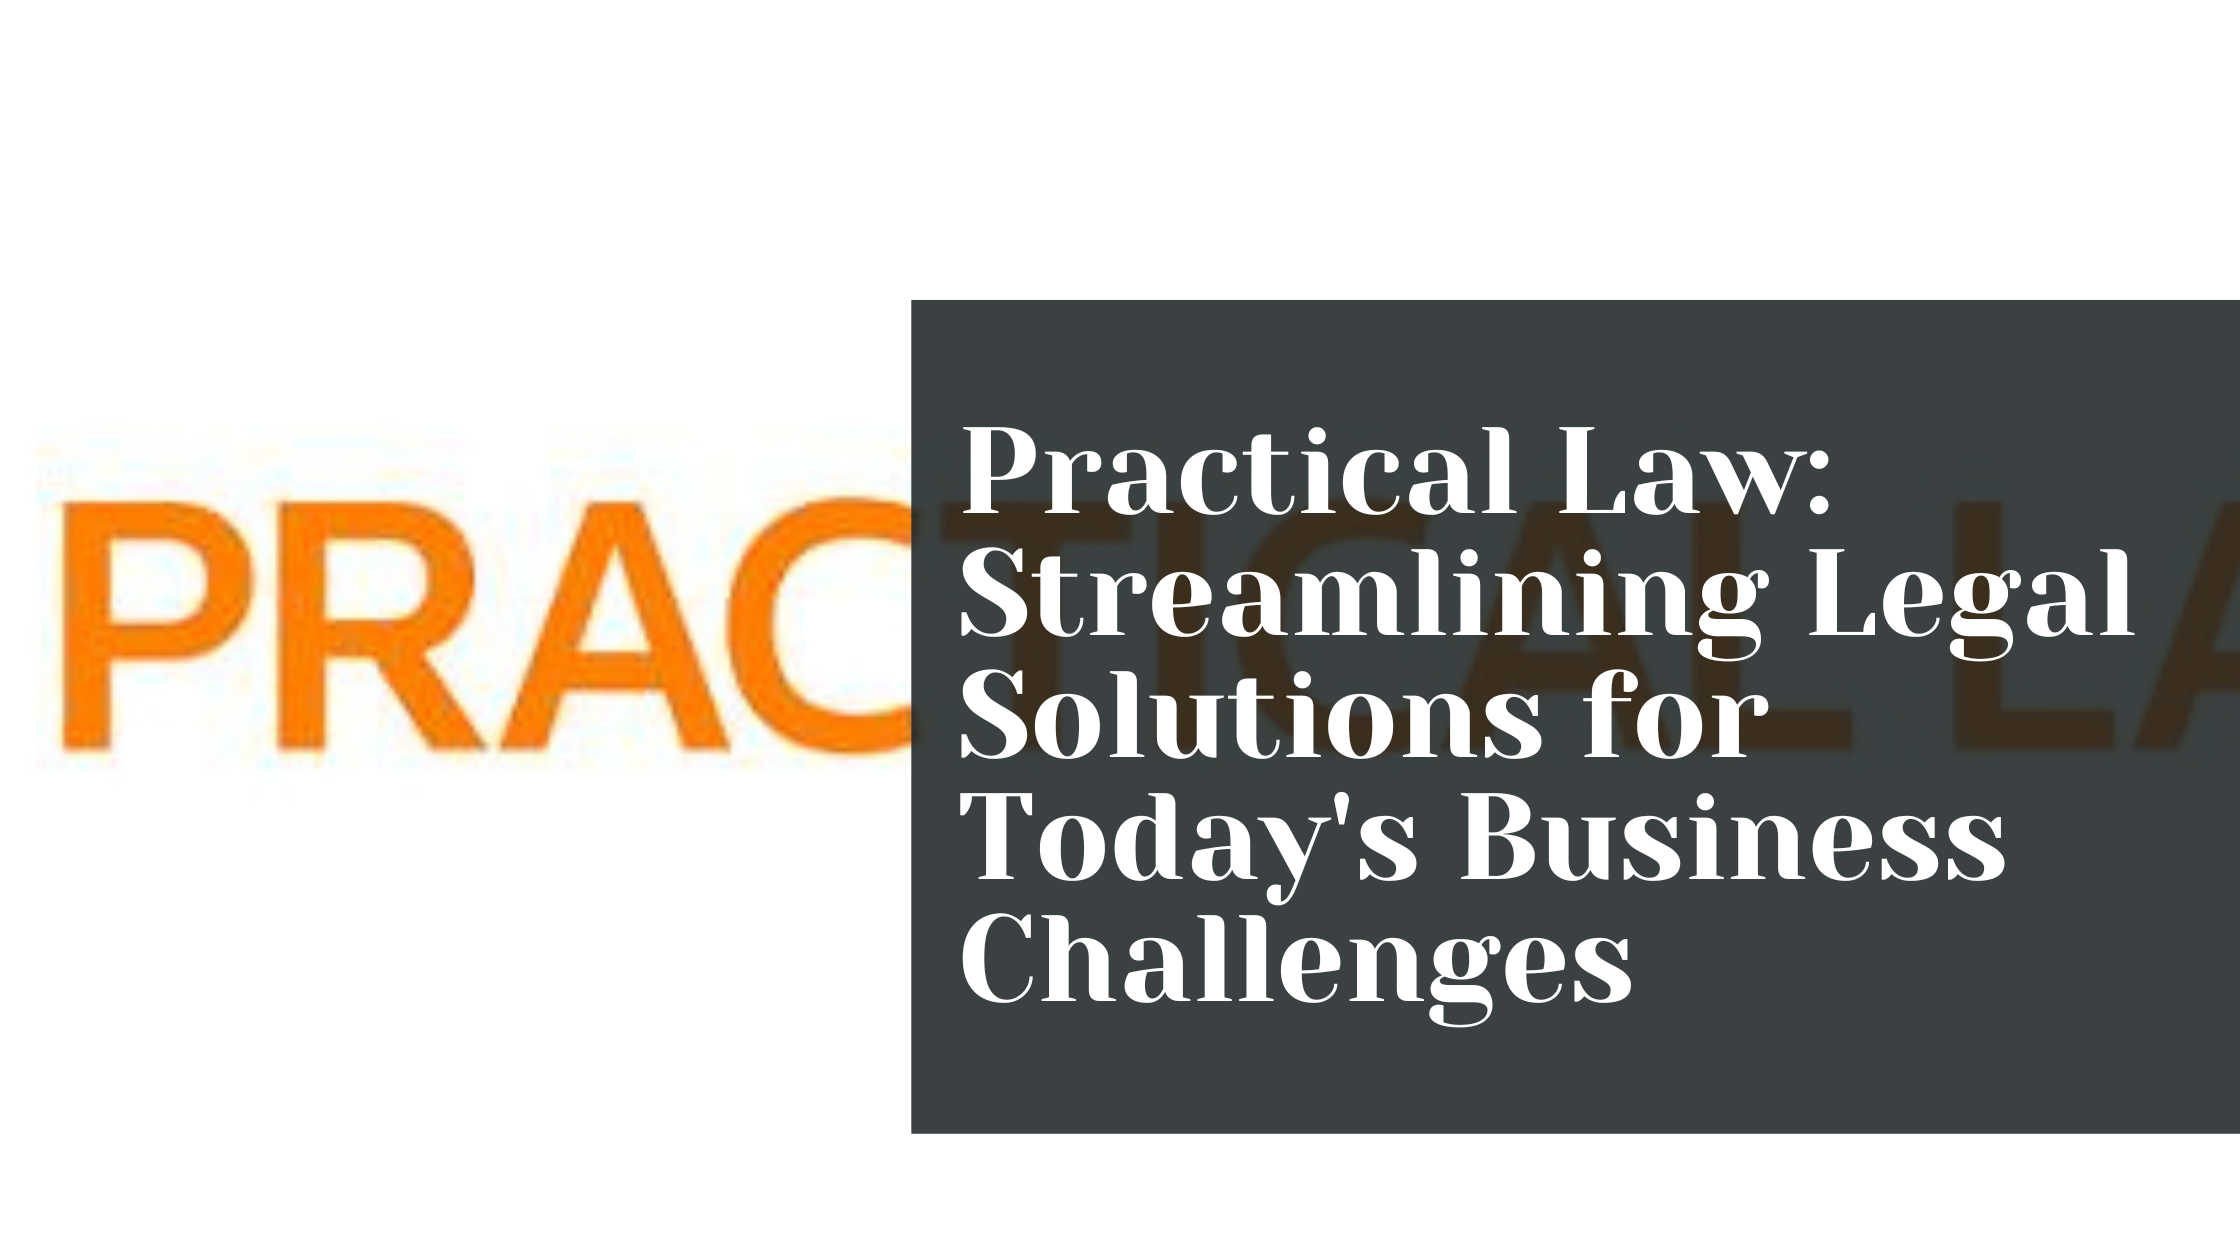 Practical Law: Streamlining Legal Solutions for Today’s Business Challenges